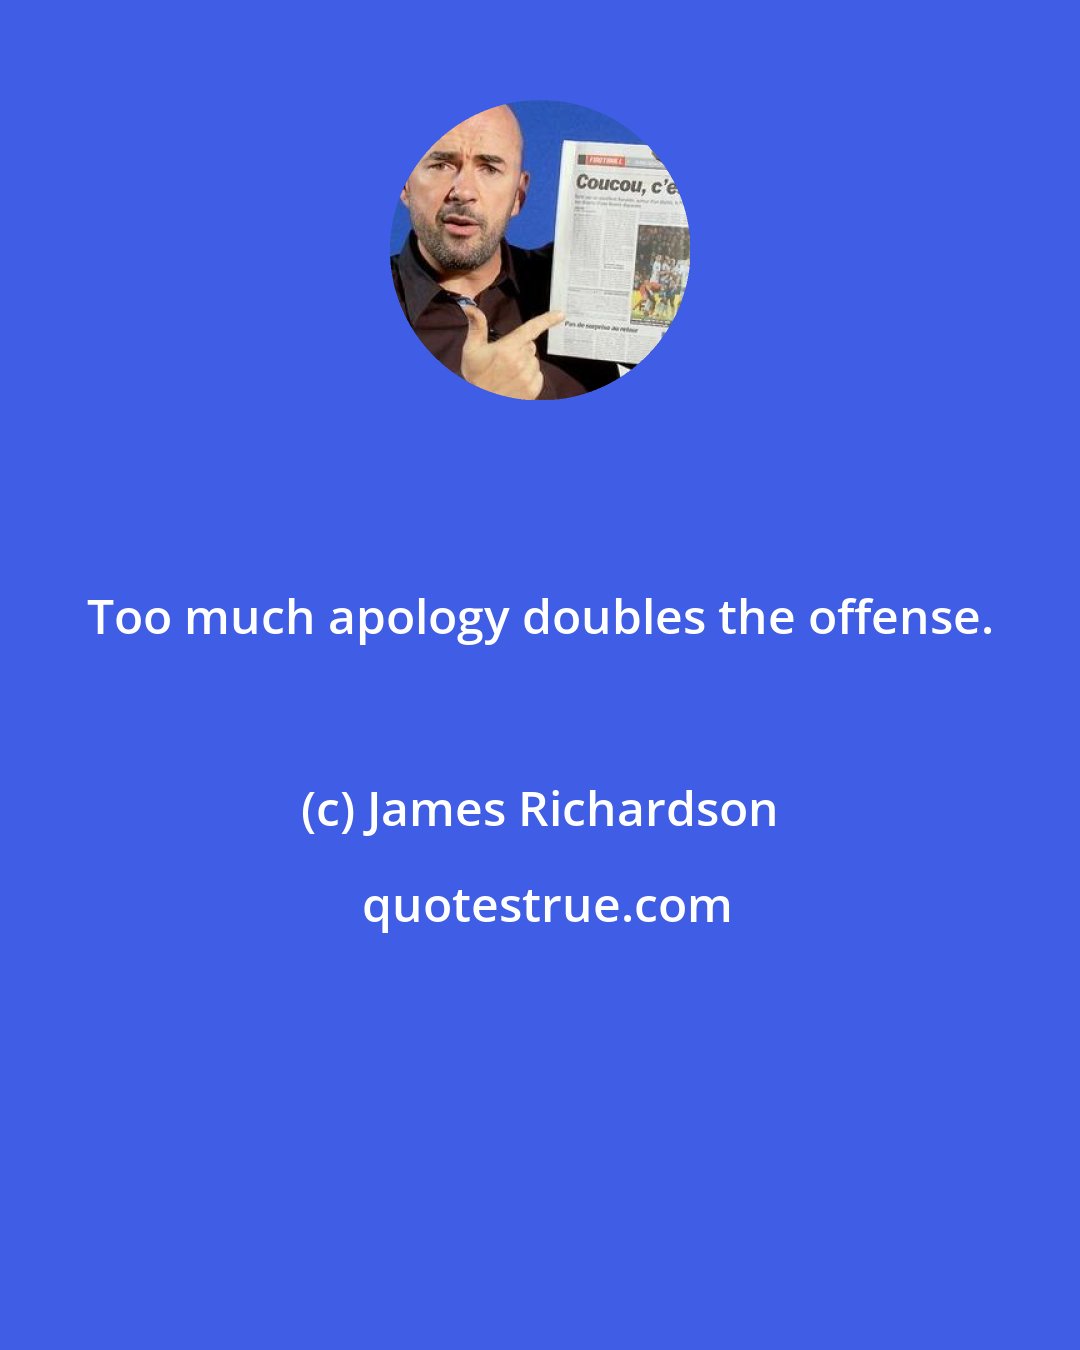 James Richardson: Too much apology doubles the offense.